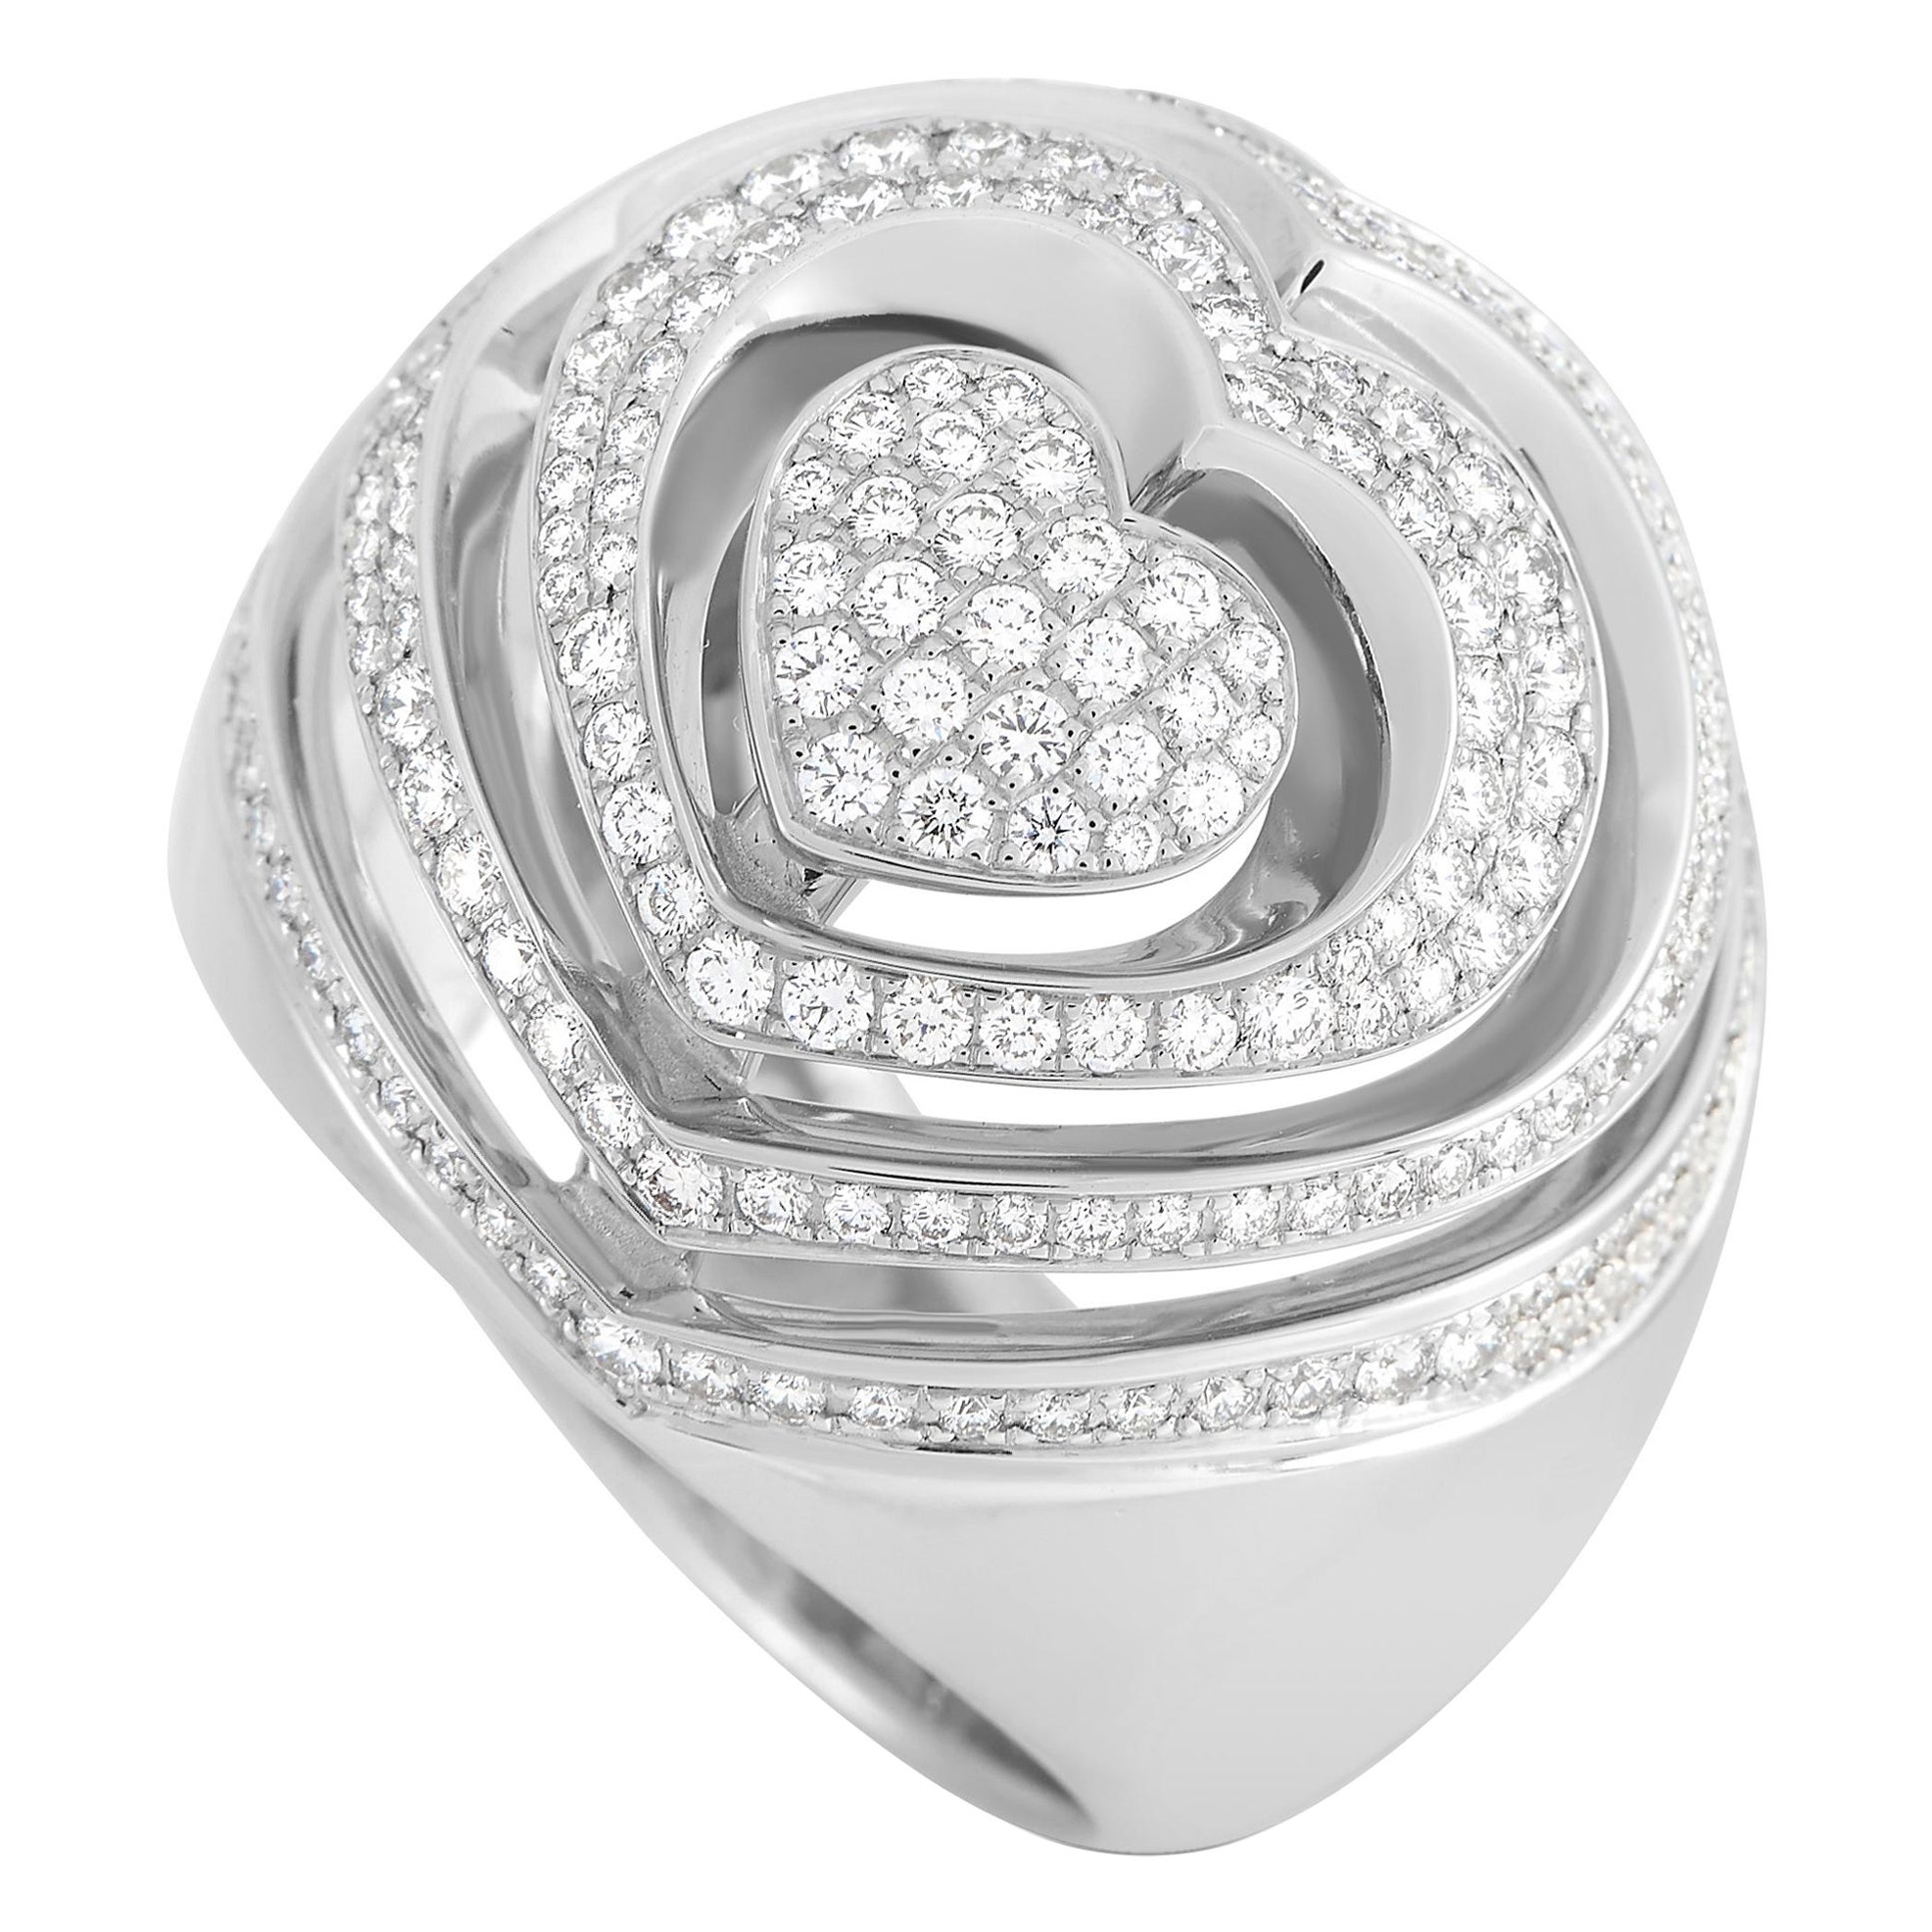 Chopard 18K White Gold 1.17 Ct Diamond Ring For Sale